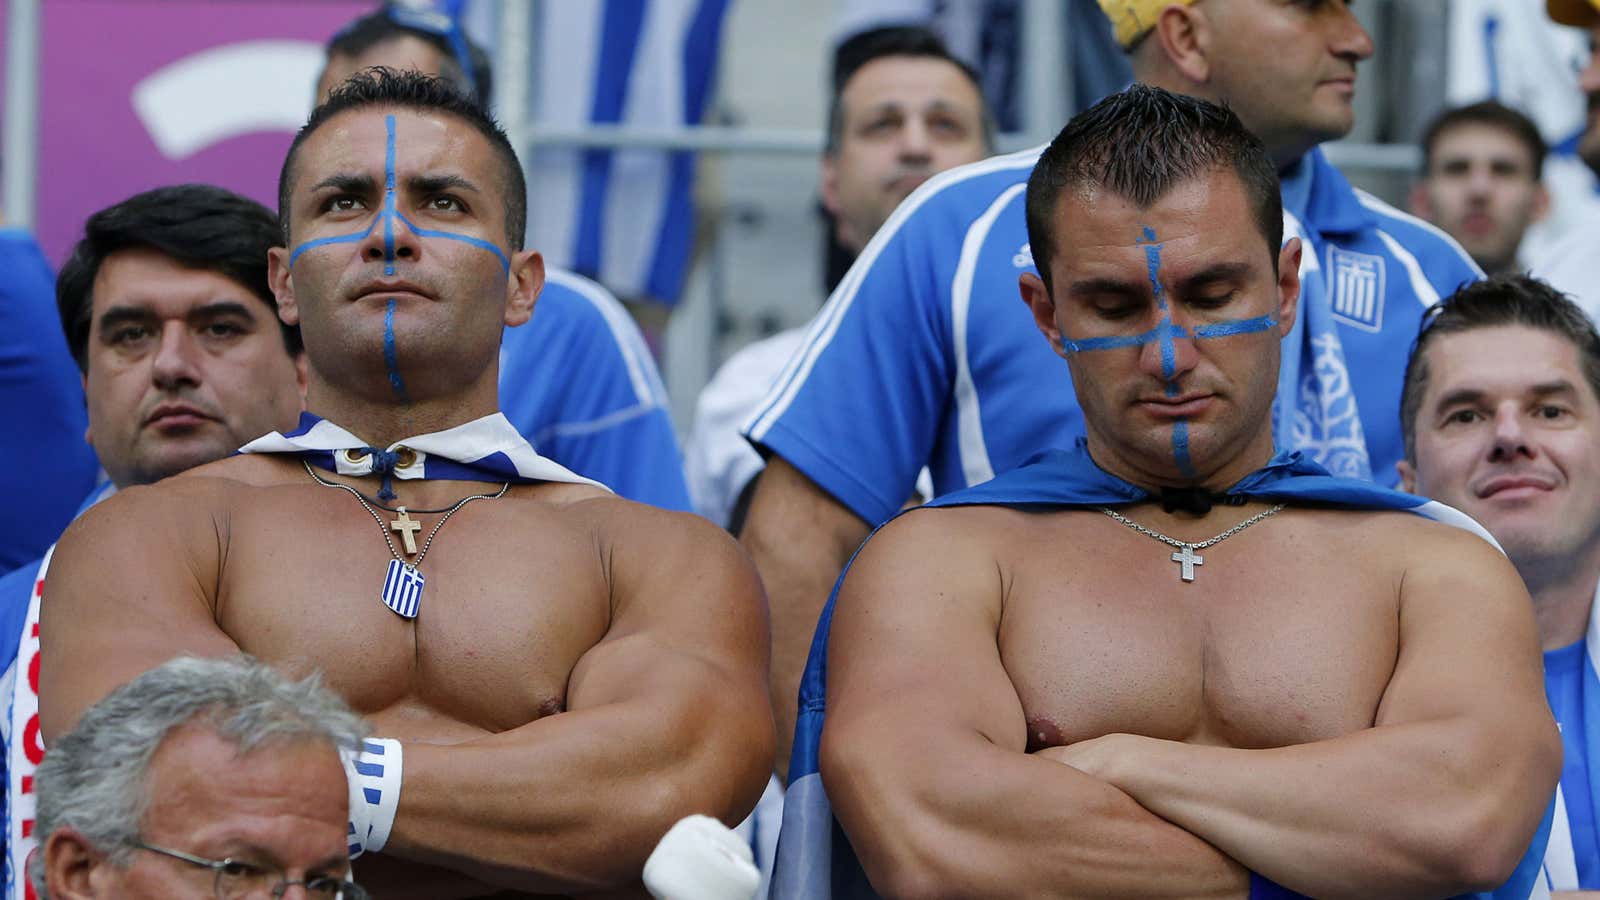 Even Greek football fans are feeling the chill of austerity.